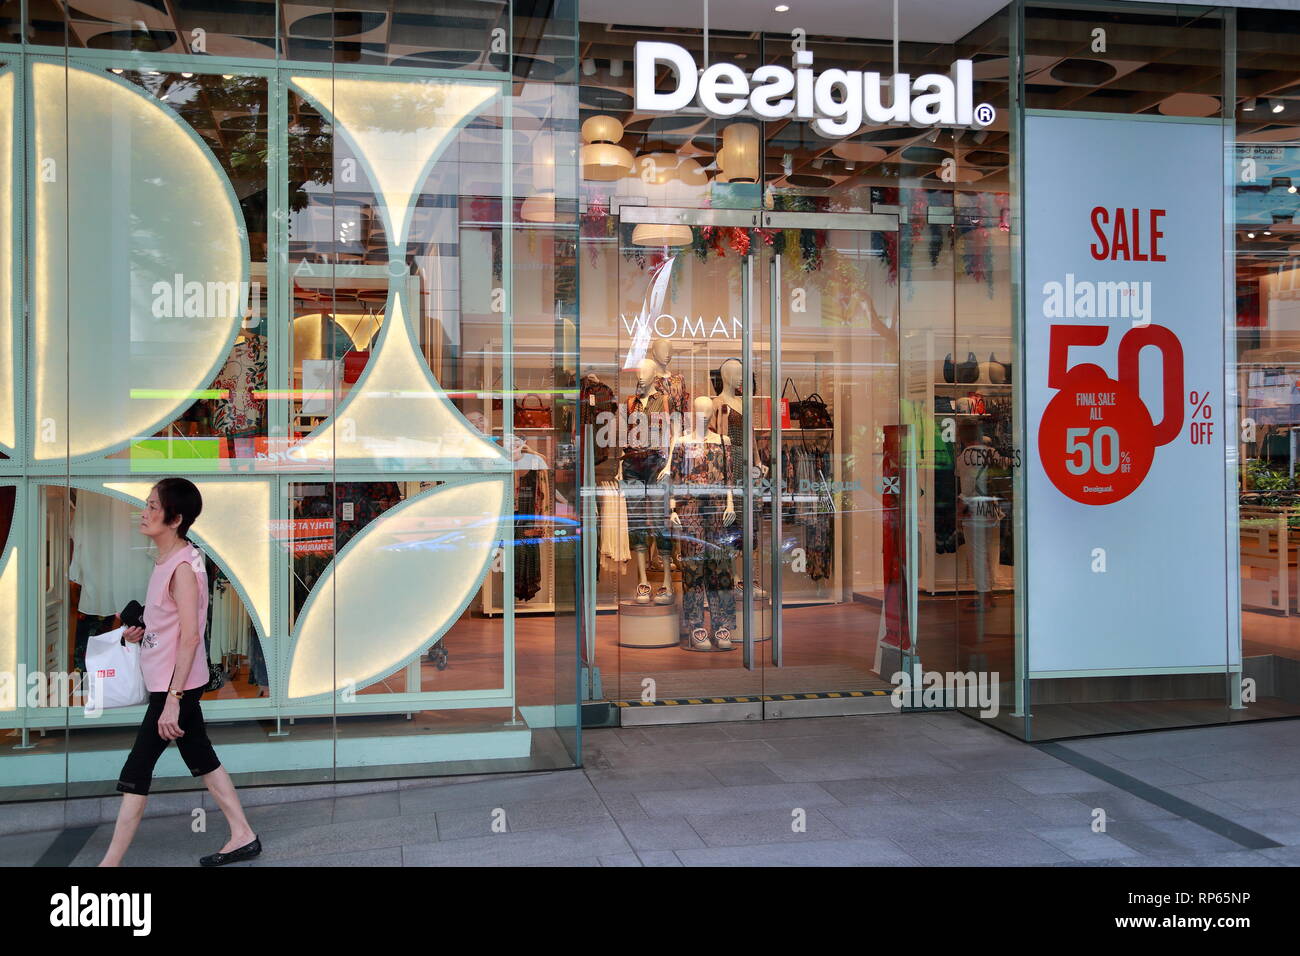 Desigual store in downtown Singapore Stock Photo